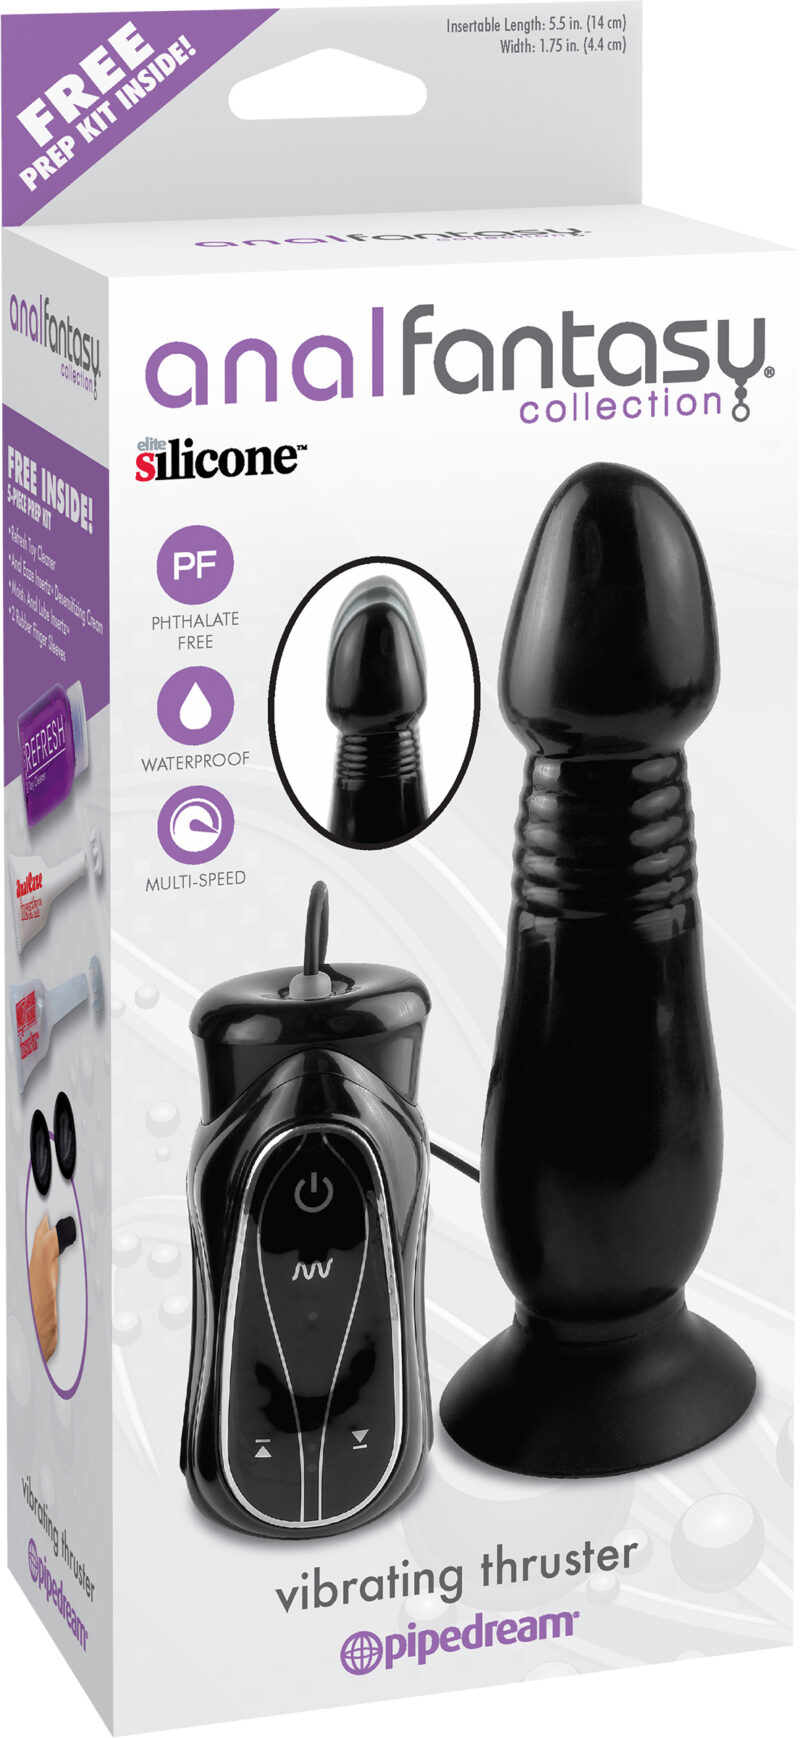 Pipedream Anal Fantasy Vibrating Thruster